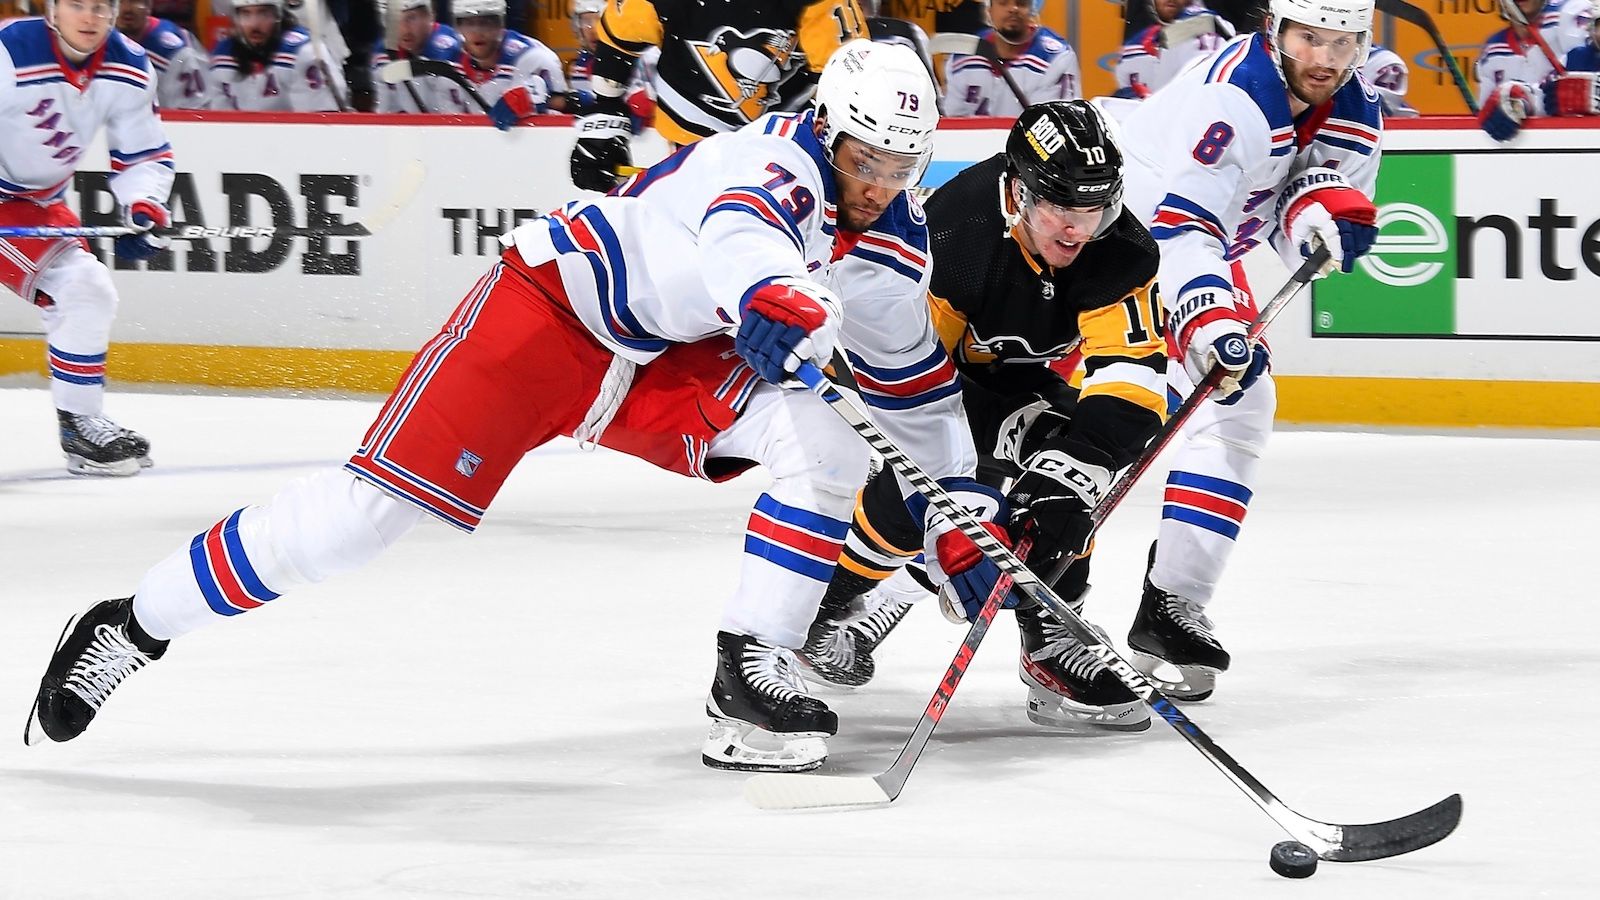 How to watch Penguins vs. Rangers, Game 6, Stanley Cup playoffs, 710 p